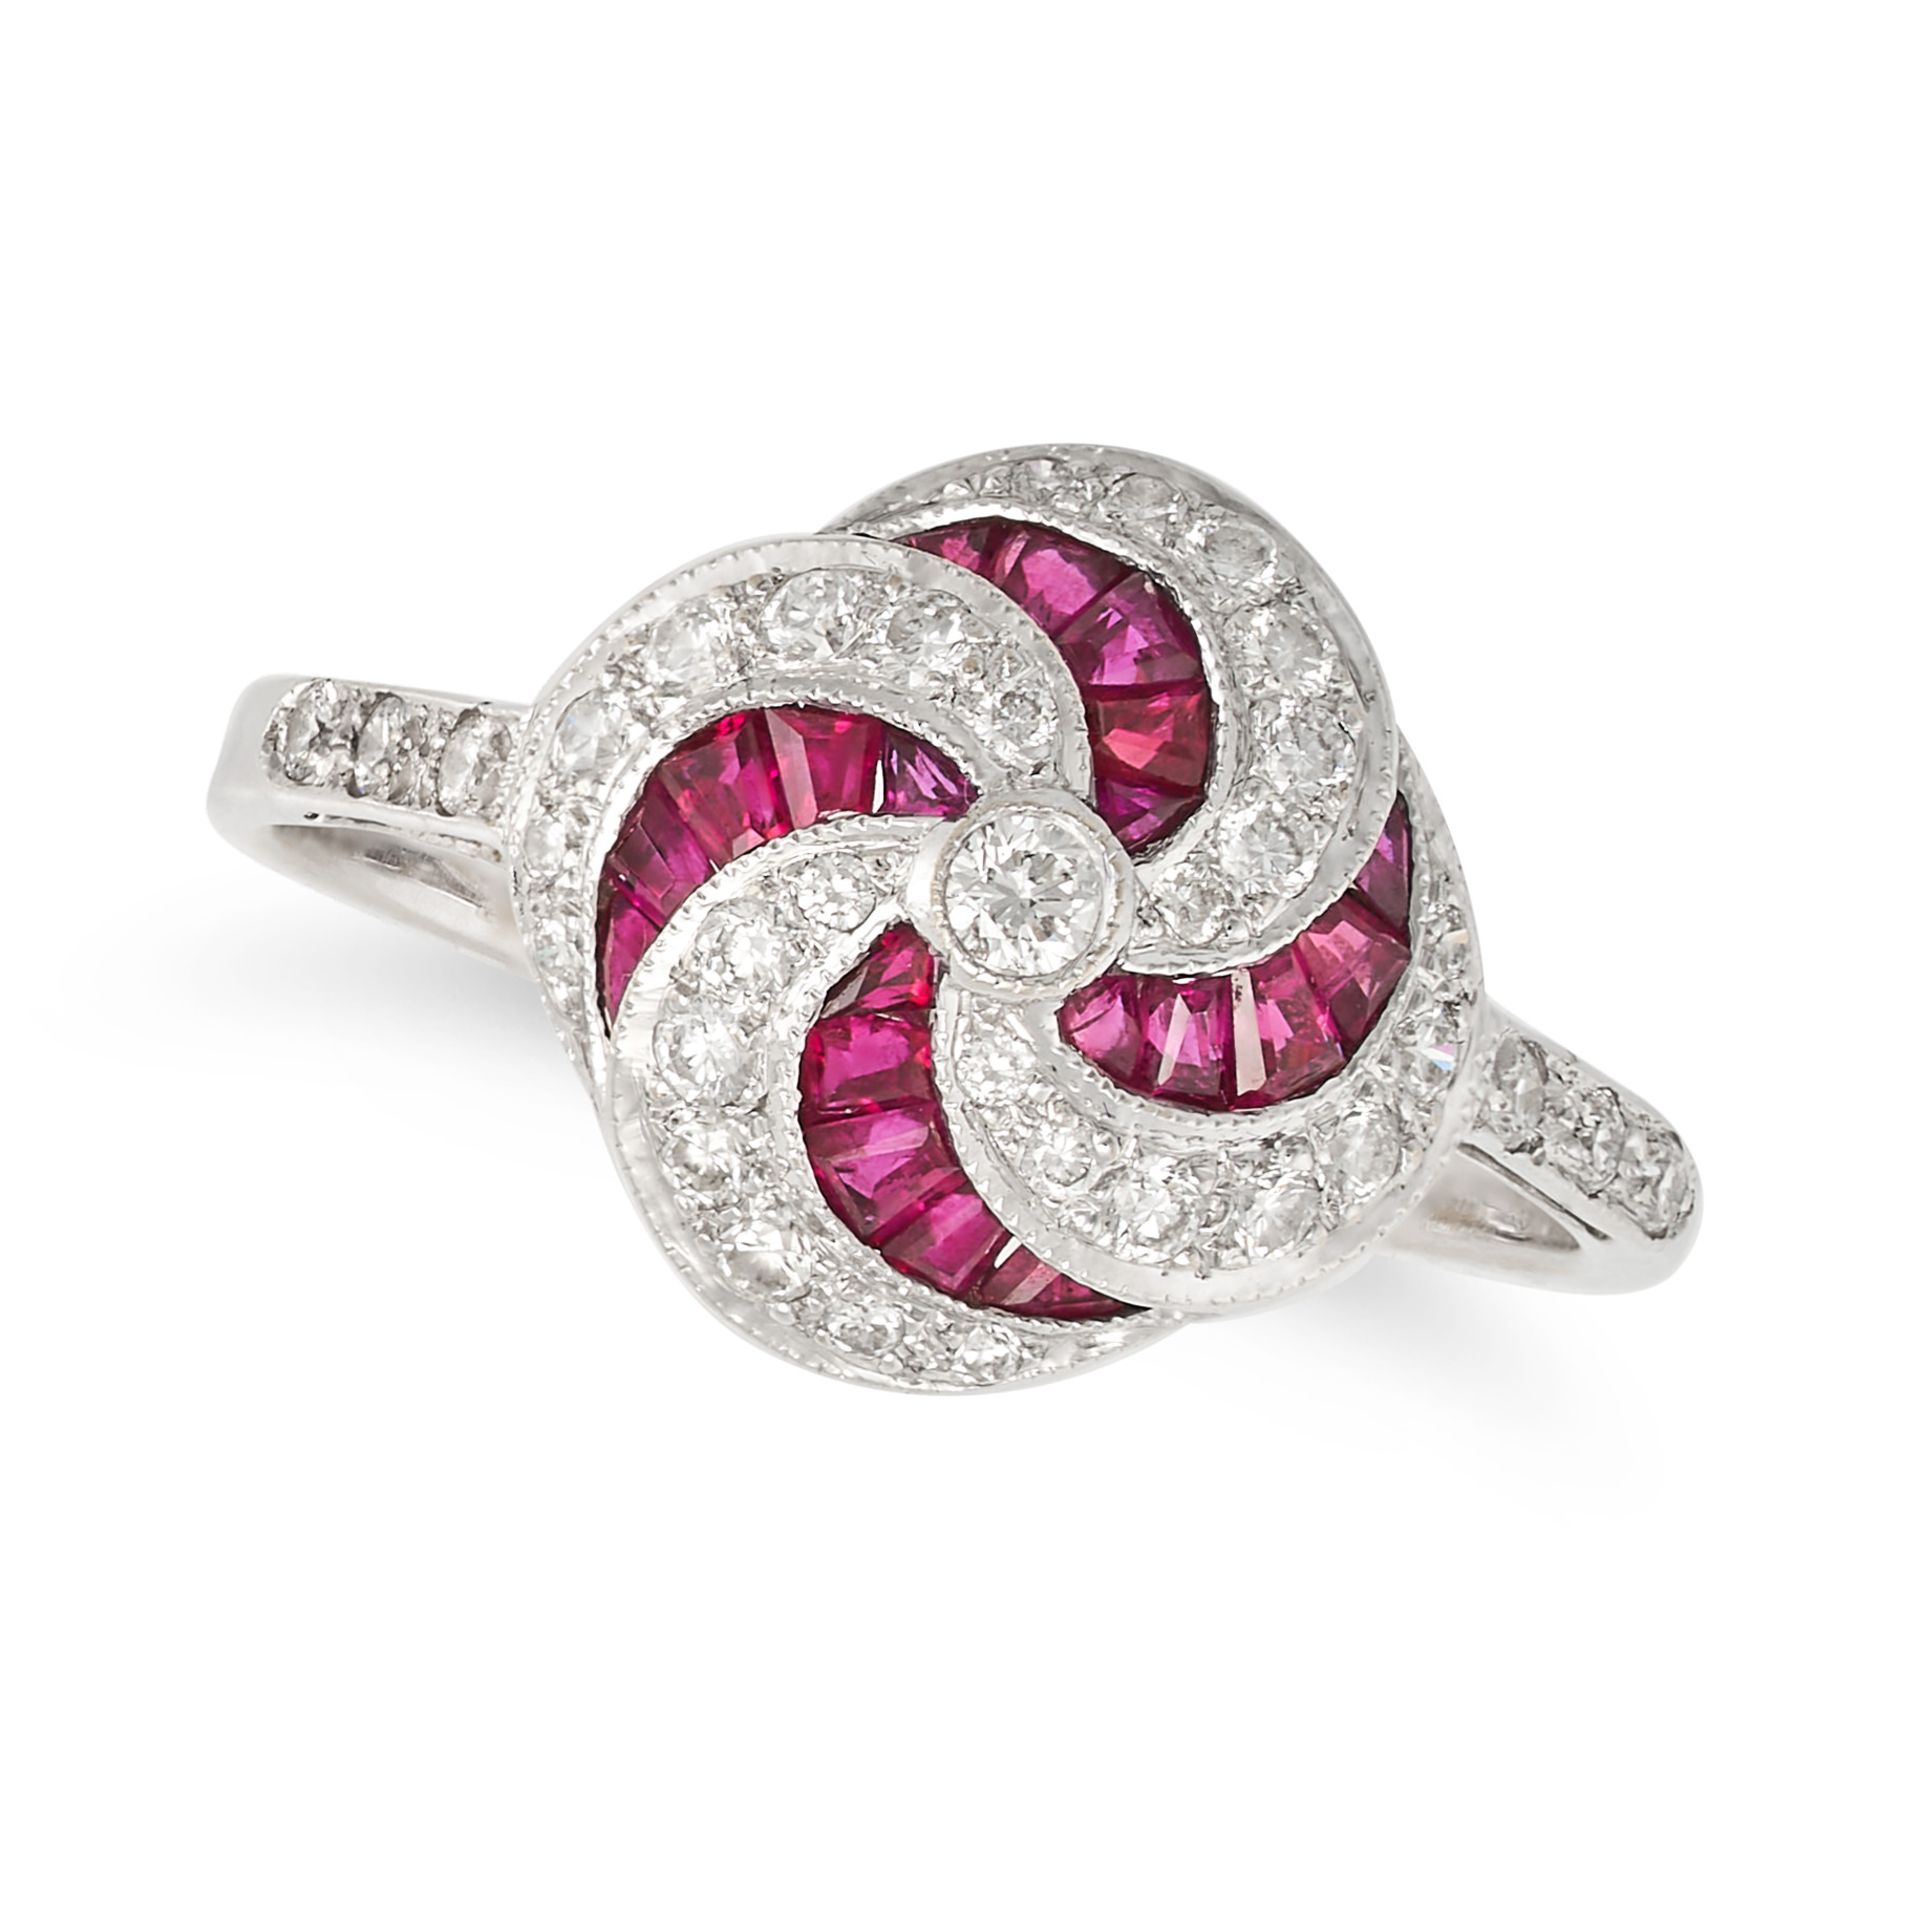 A RUBY AND DIAMOND DRESS RING in 18ct white gold, set with calibre cut rubies and round brilliant...